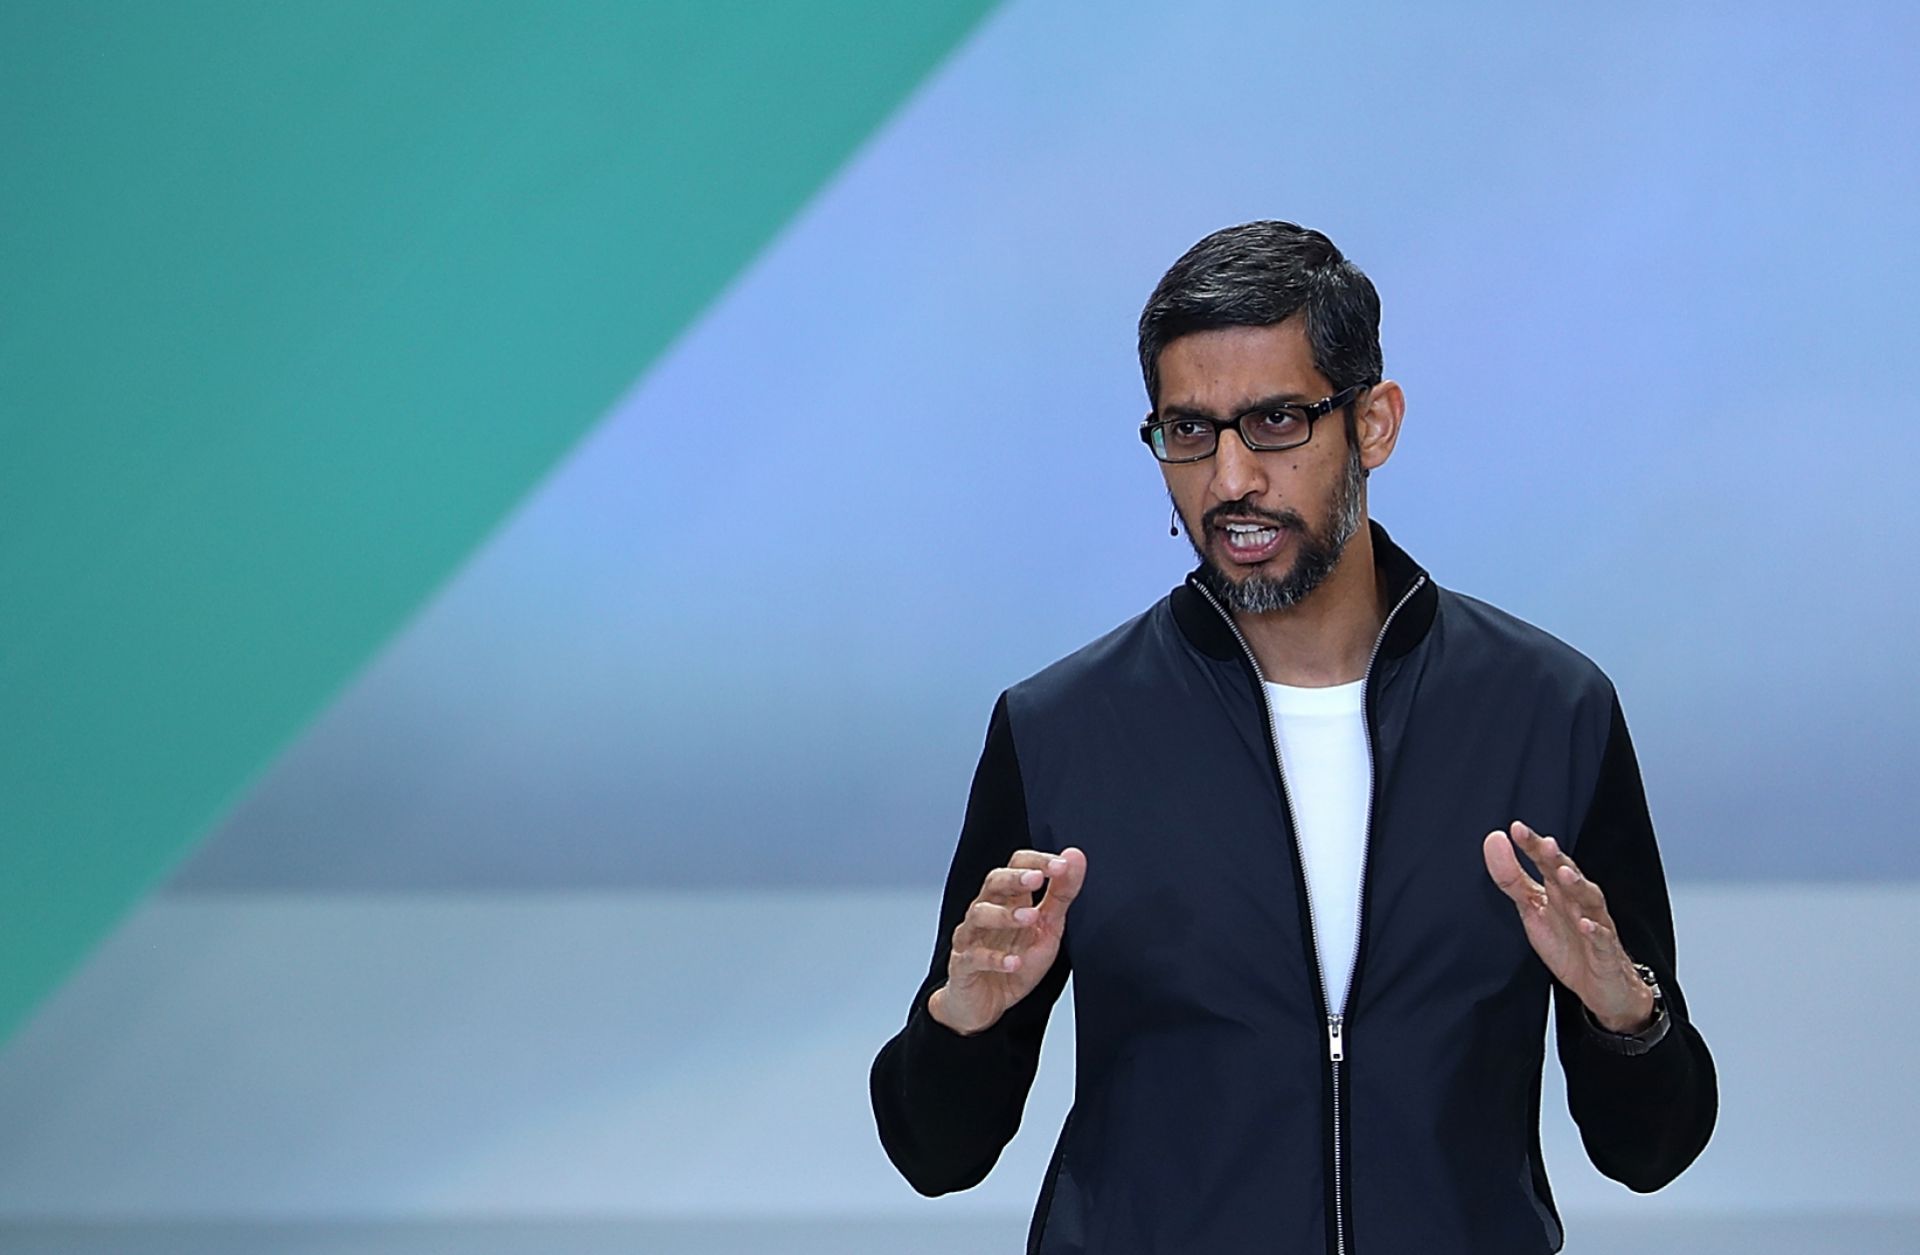 Google CEO Sundar Pichai speaks at the Google I/O 2017 Conference in Mountain View, California, on May 17, 2017.